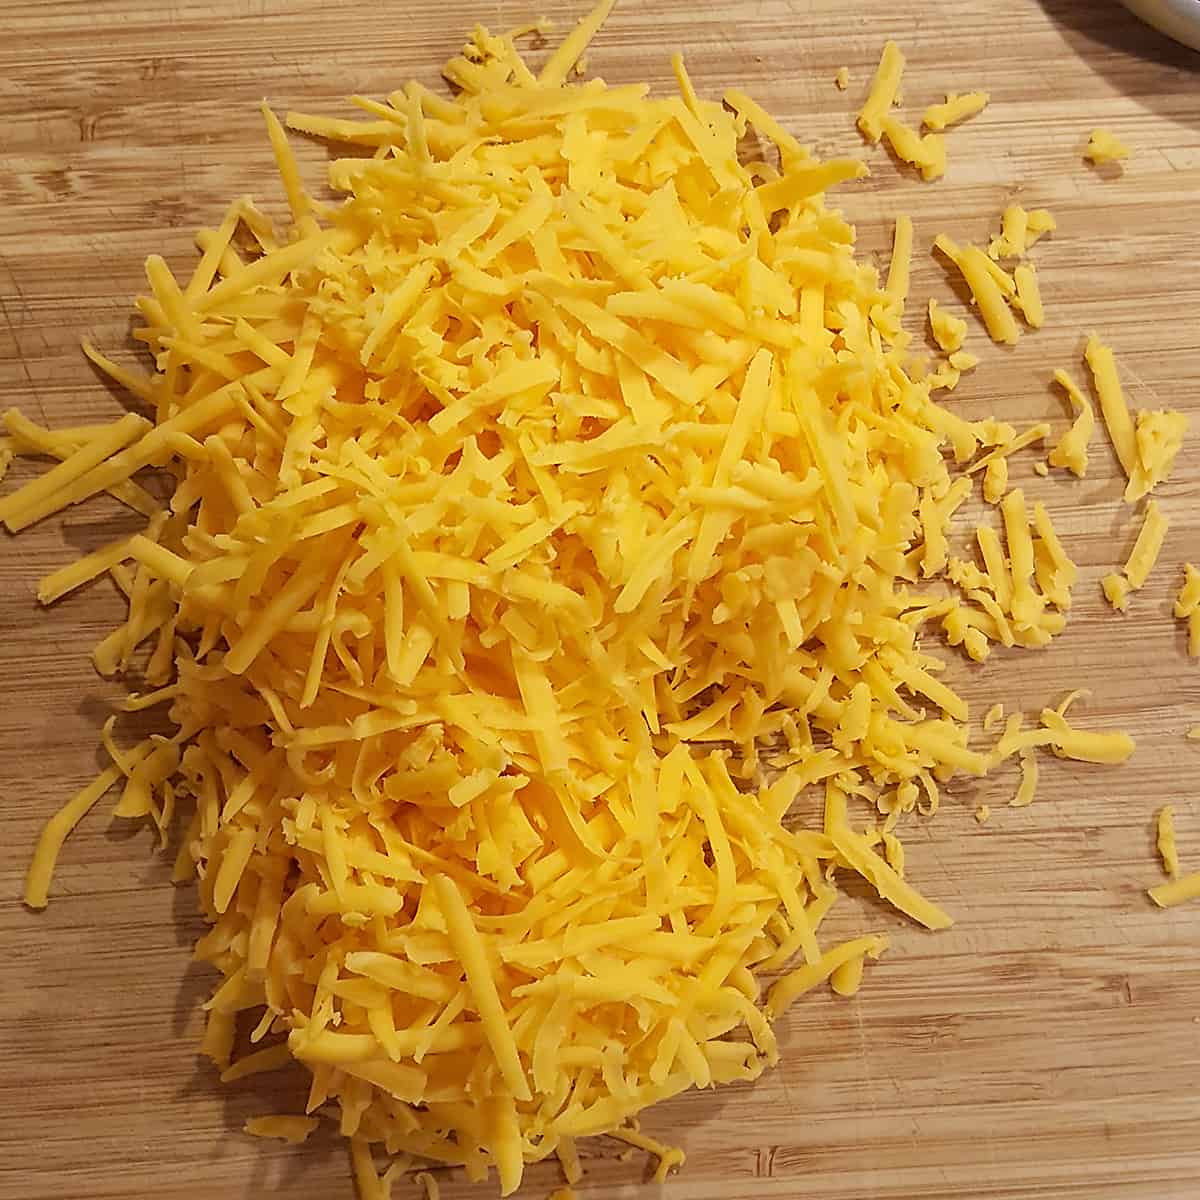 A mound of grated cheese.